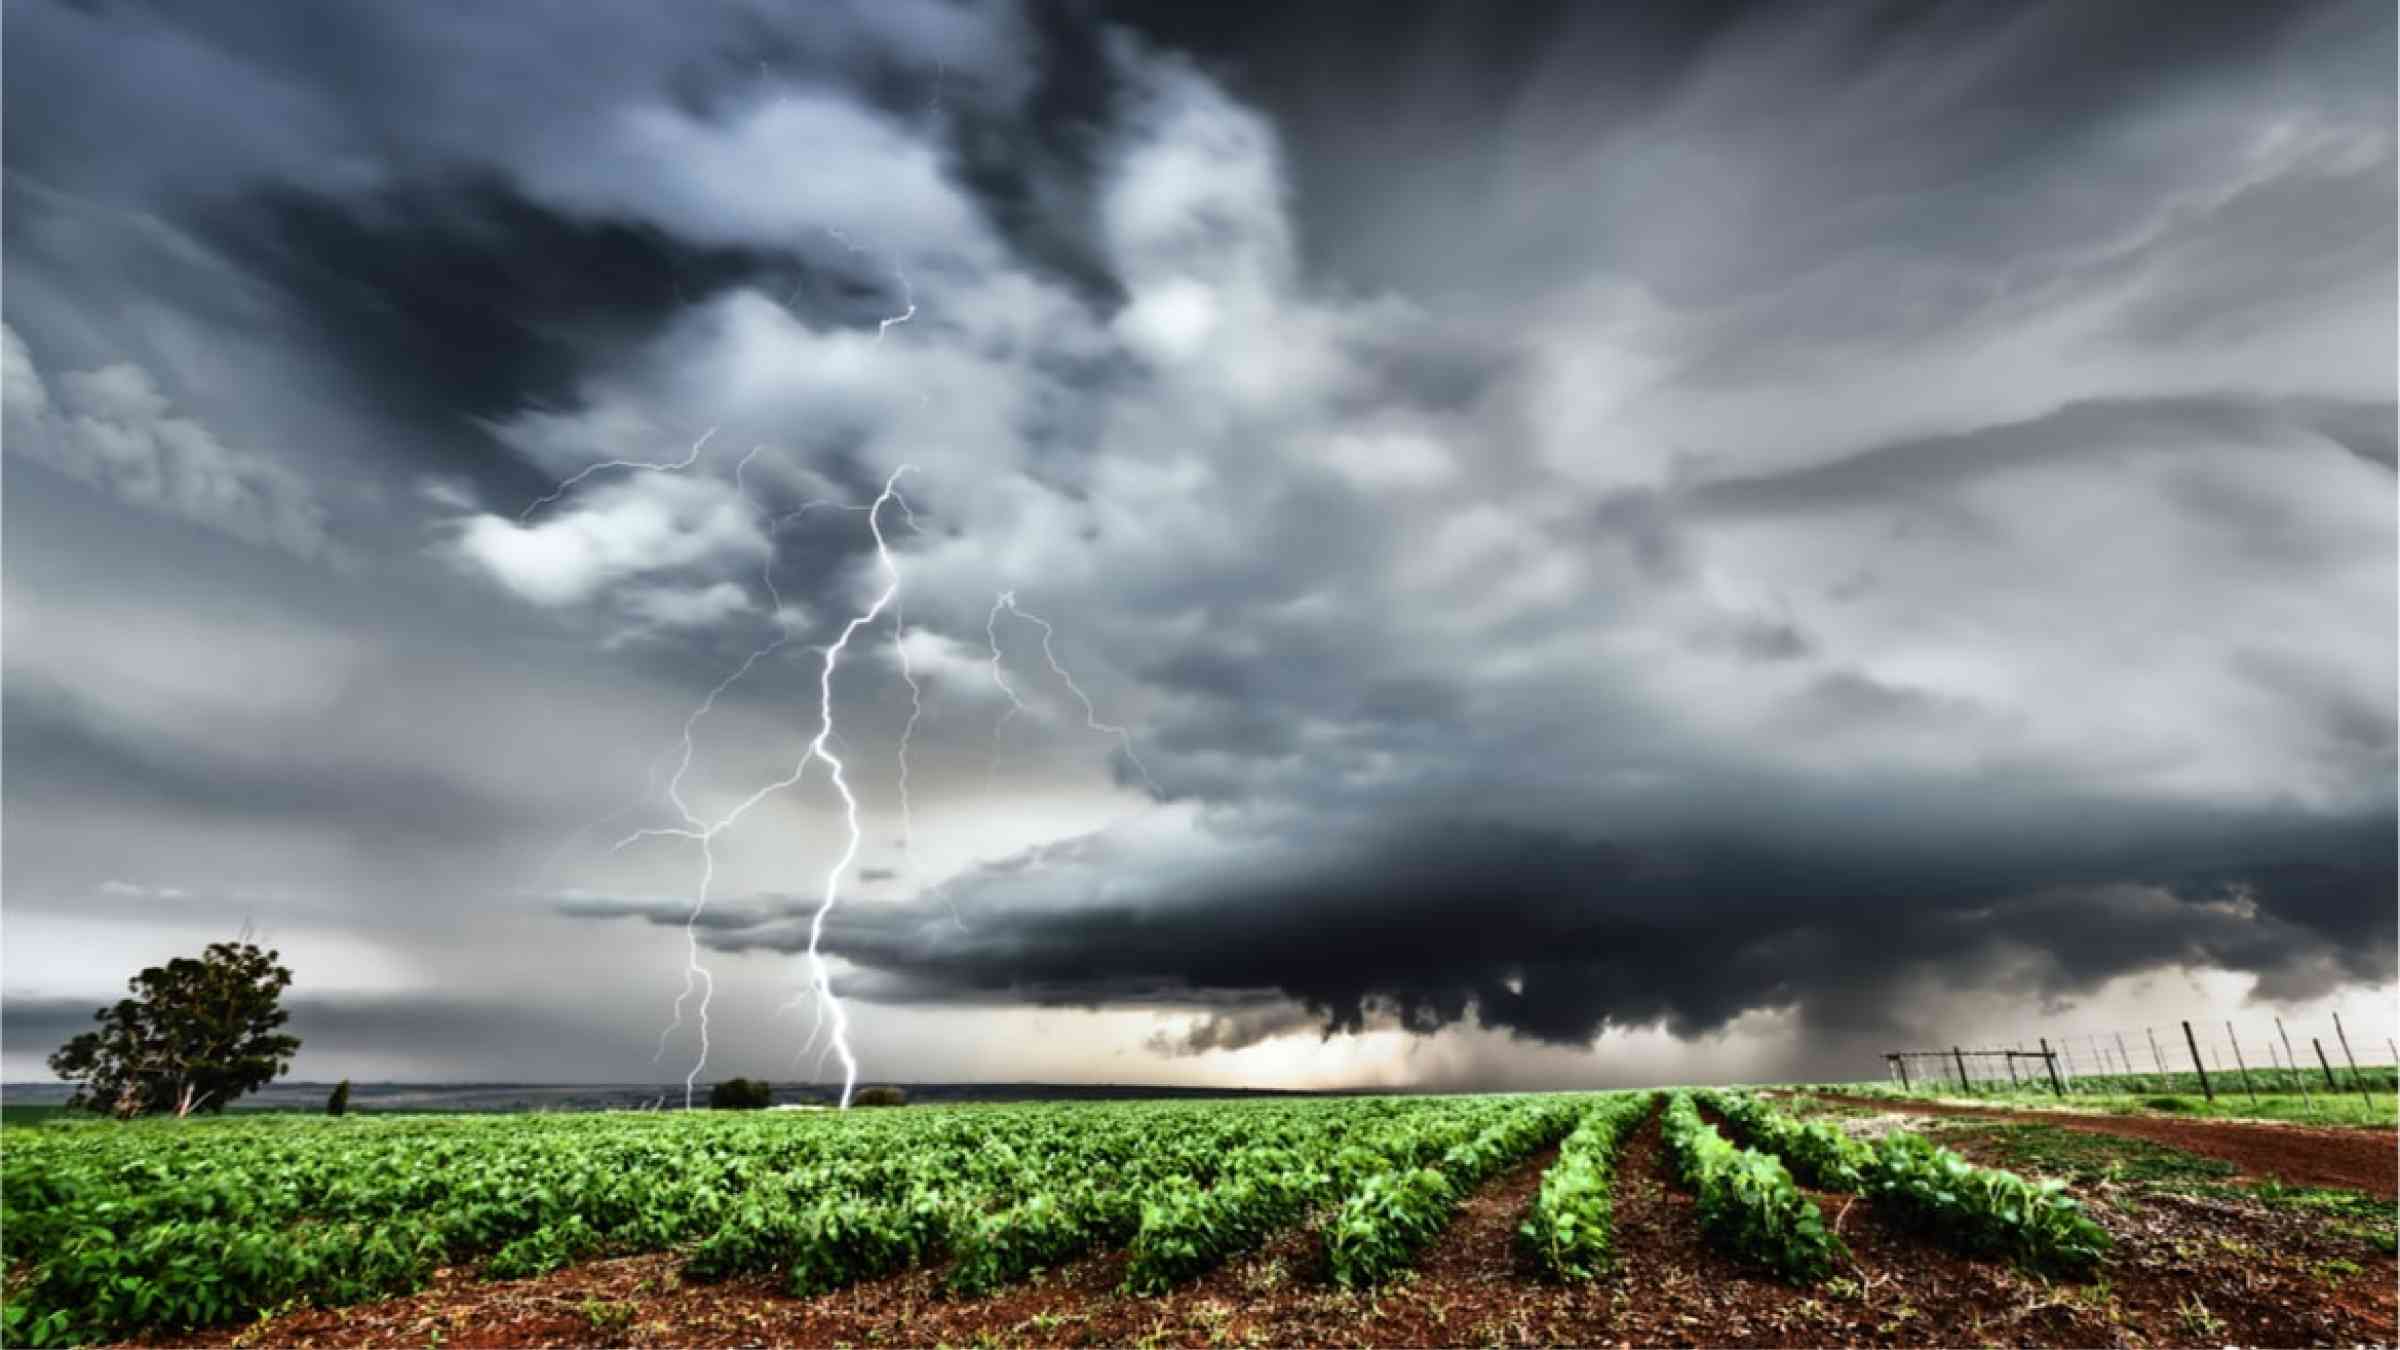 Thunderstorm over fields in South Africa.